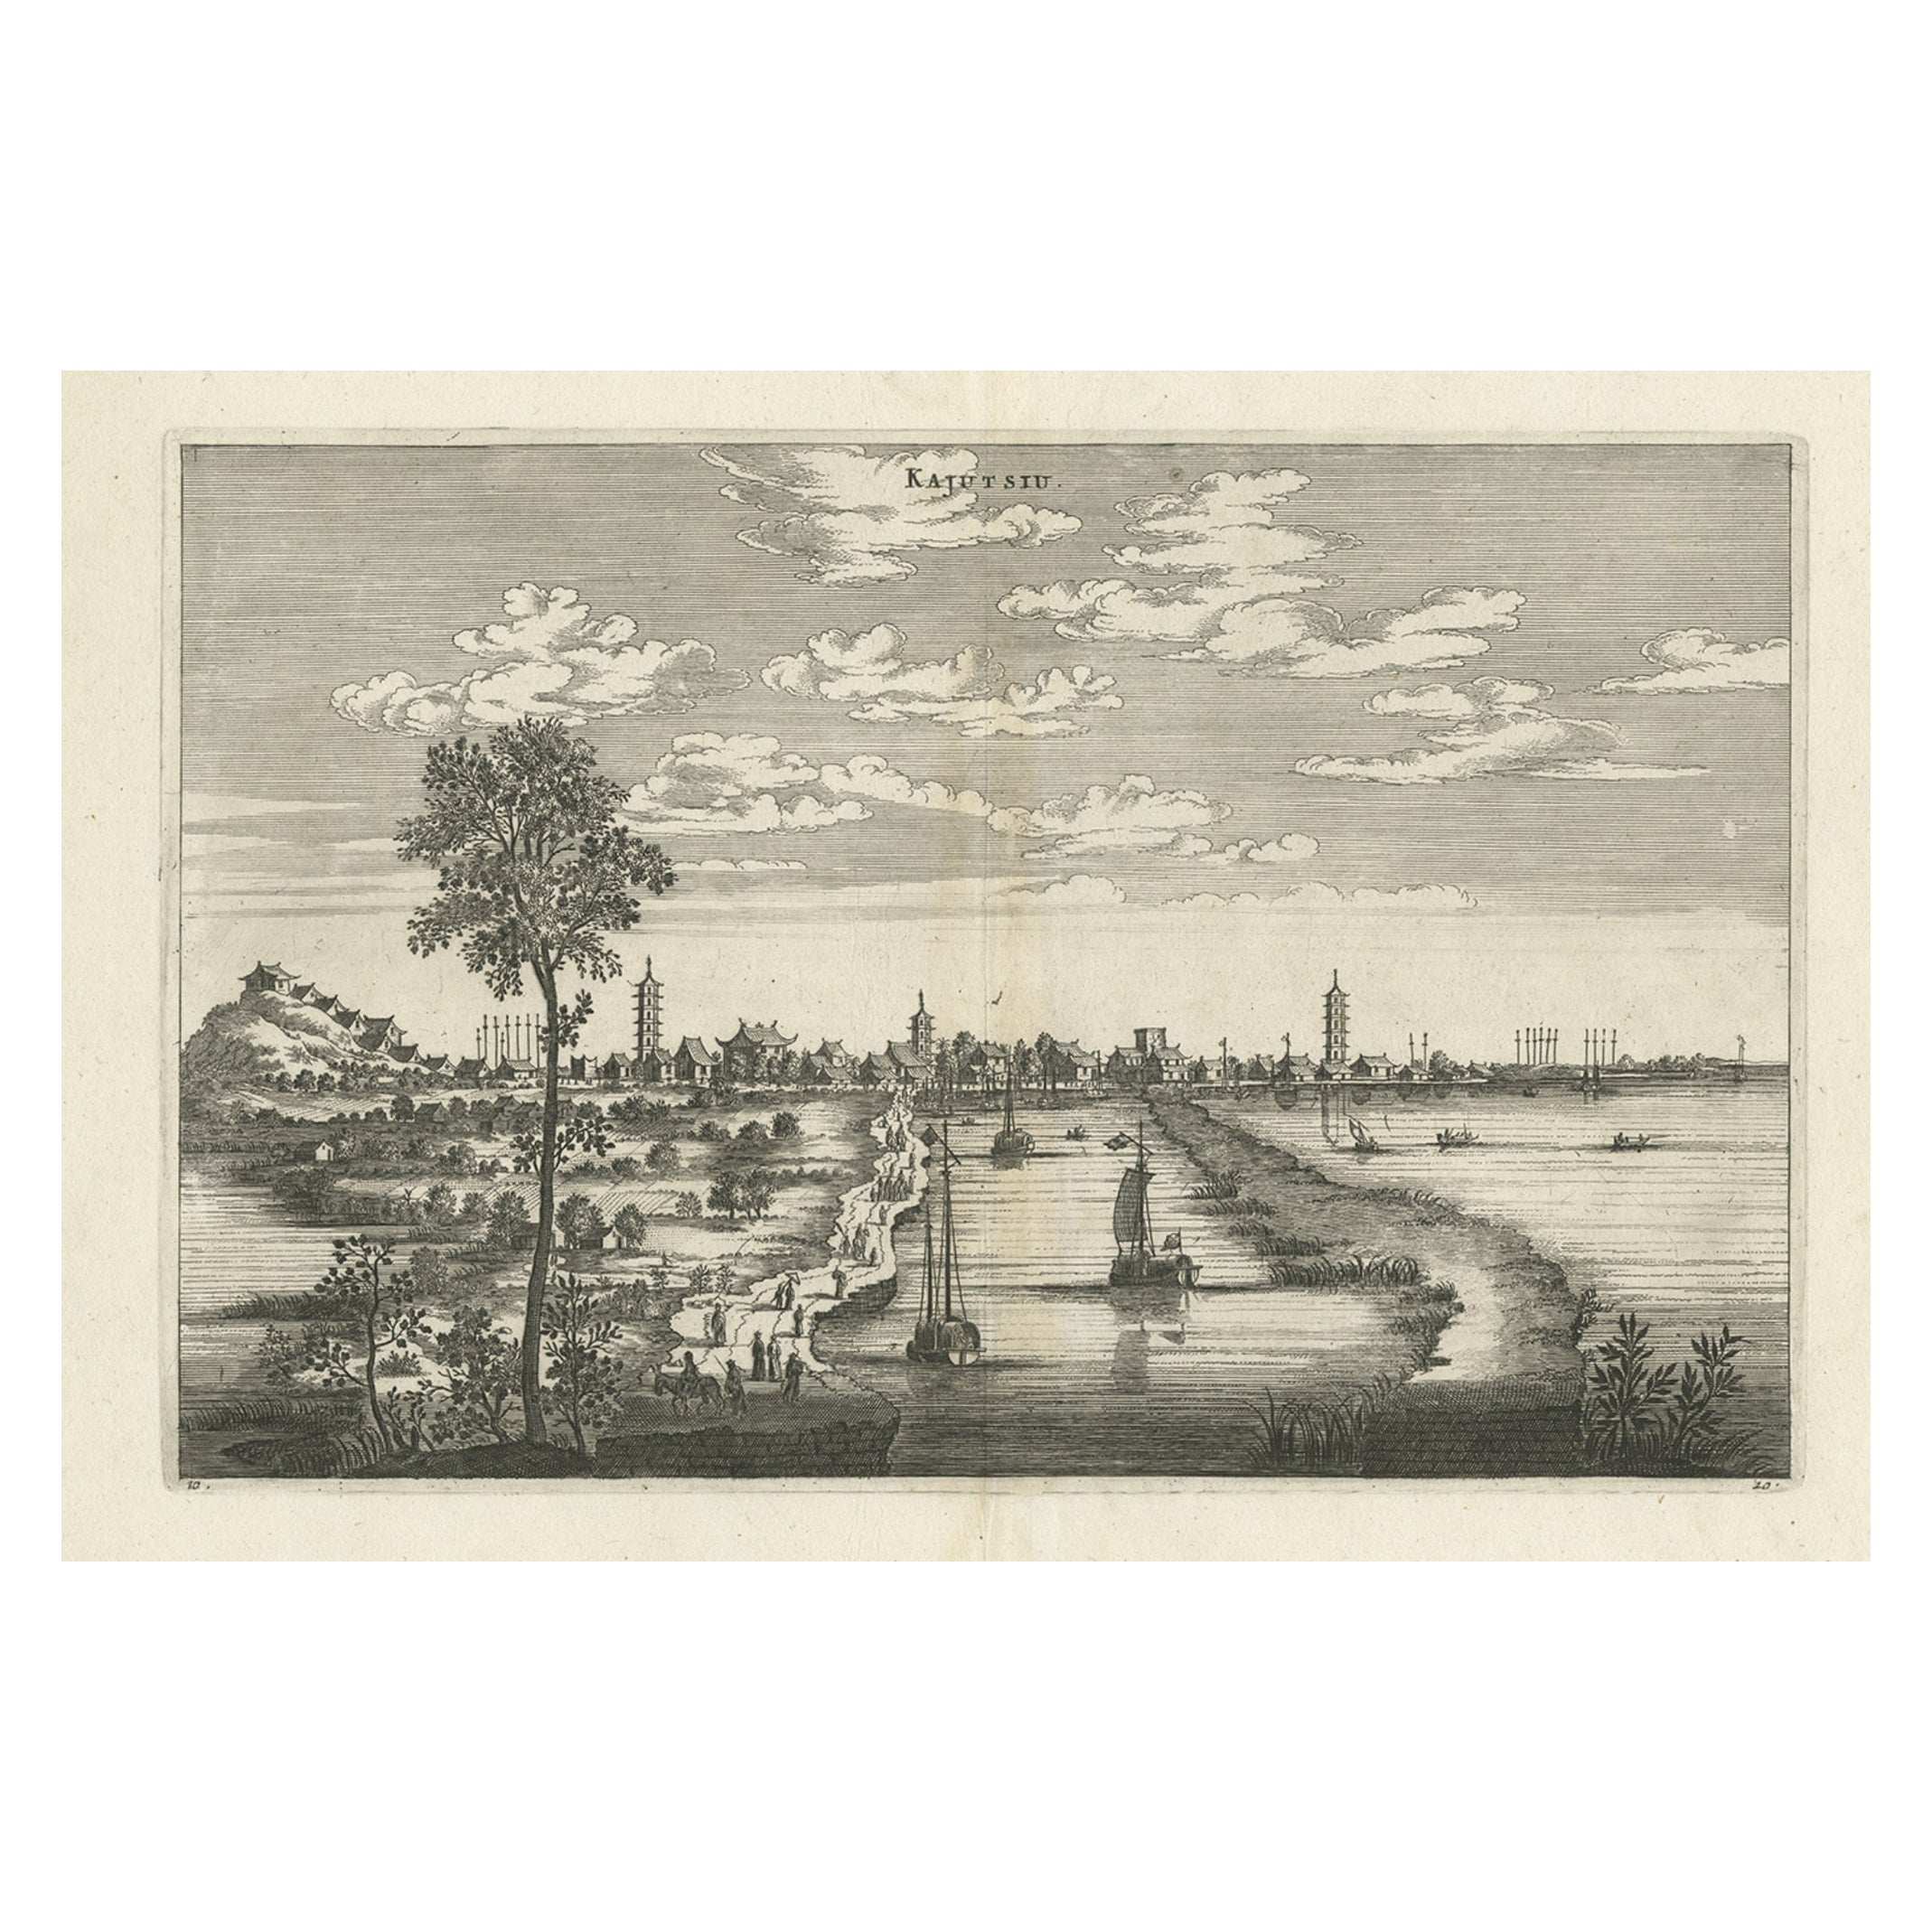 Old Copper Engraving of the City of Kajutsiu in China, 1668